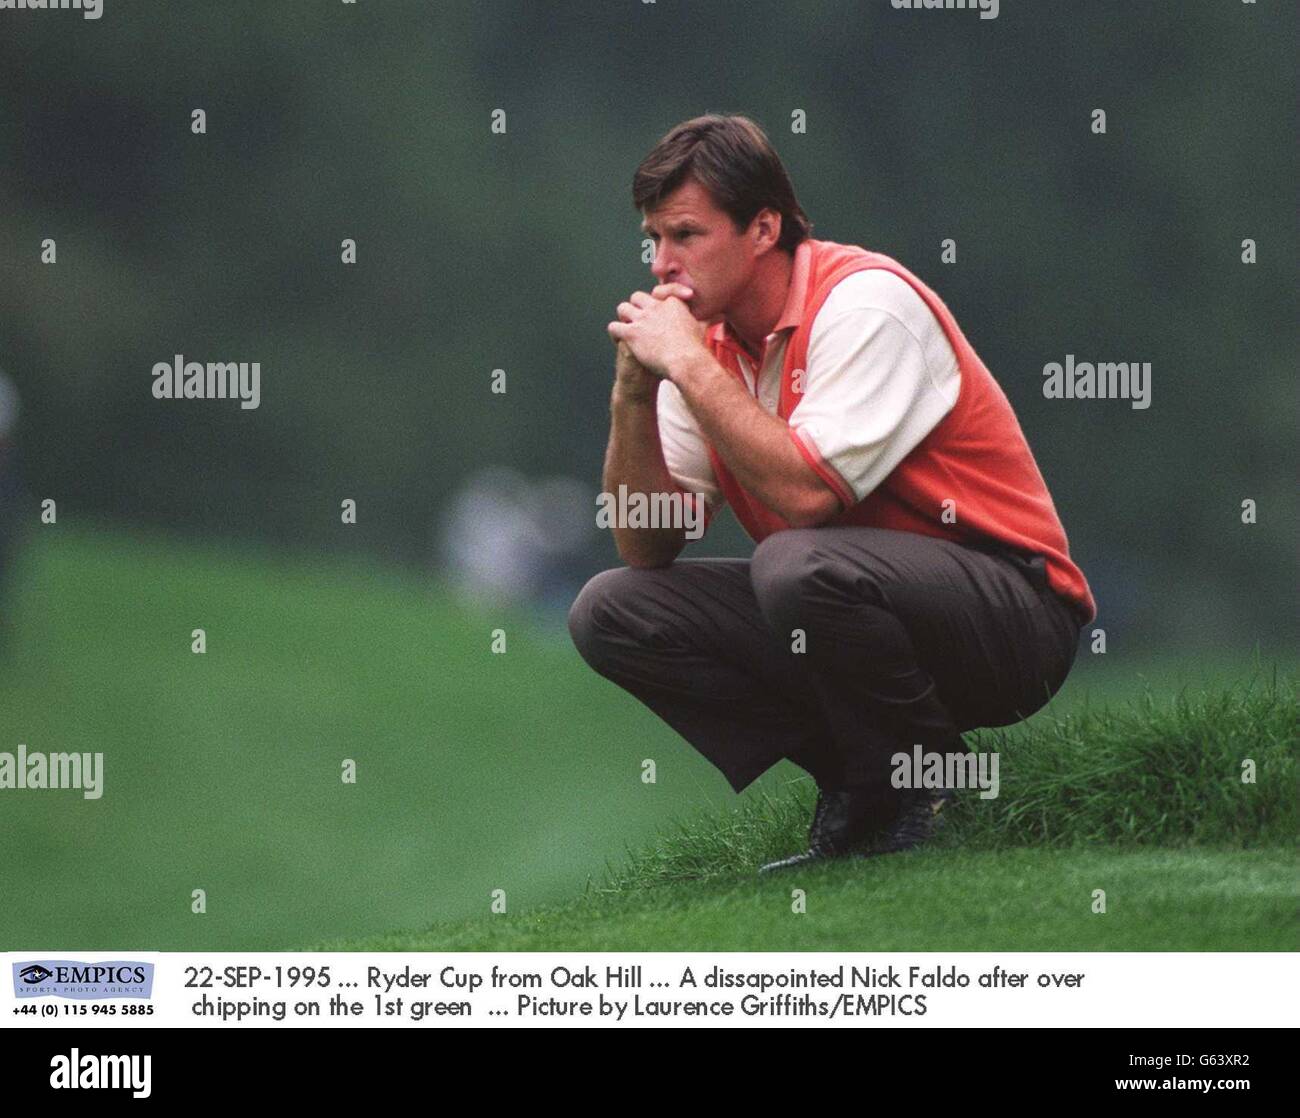 22-SEP-1995 ... Ryder Cup from Oak Hill ... A dissapointed Nick Faldo after over chipping on the 1st green ... Picture by Laurence Griffiths/EMPICS Stock Photo